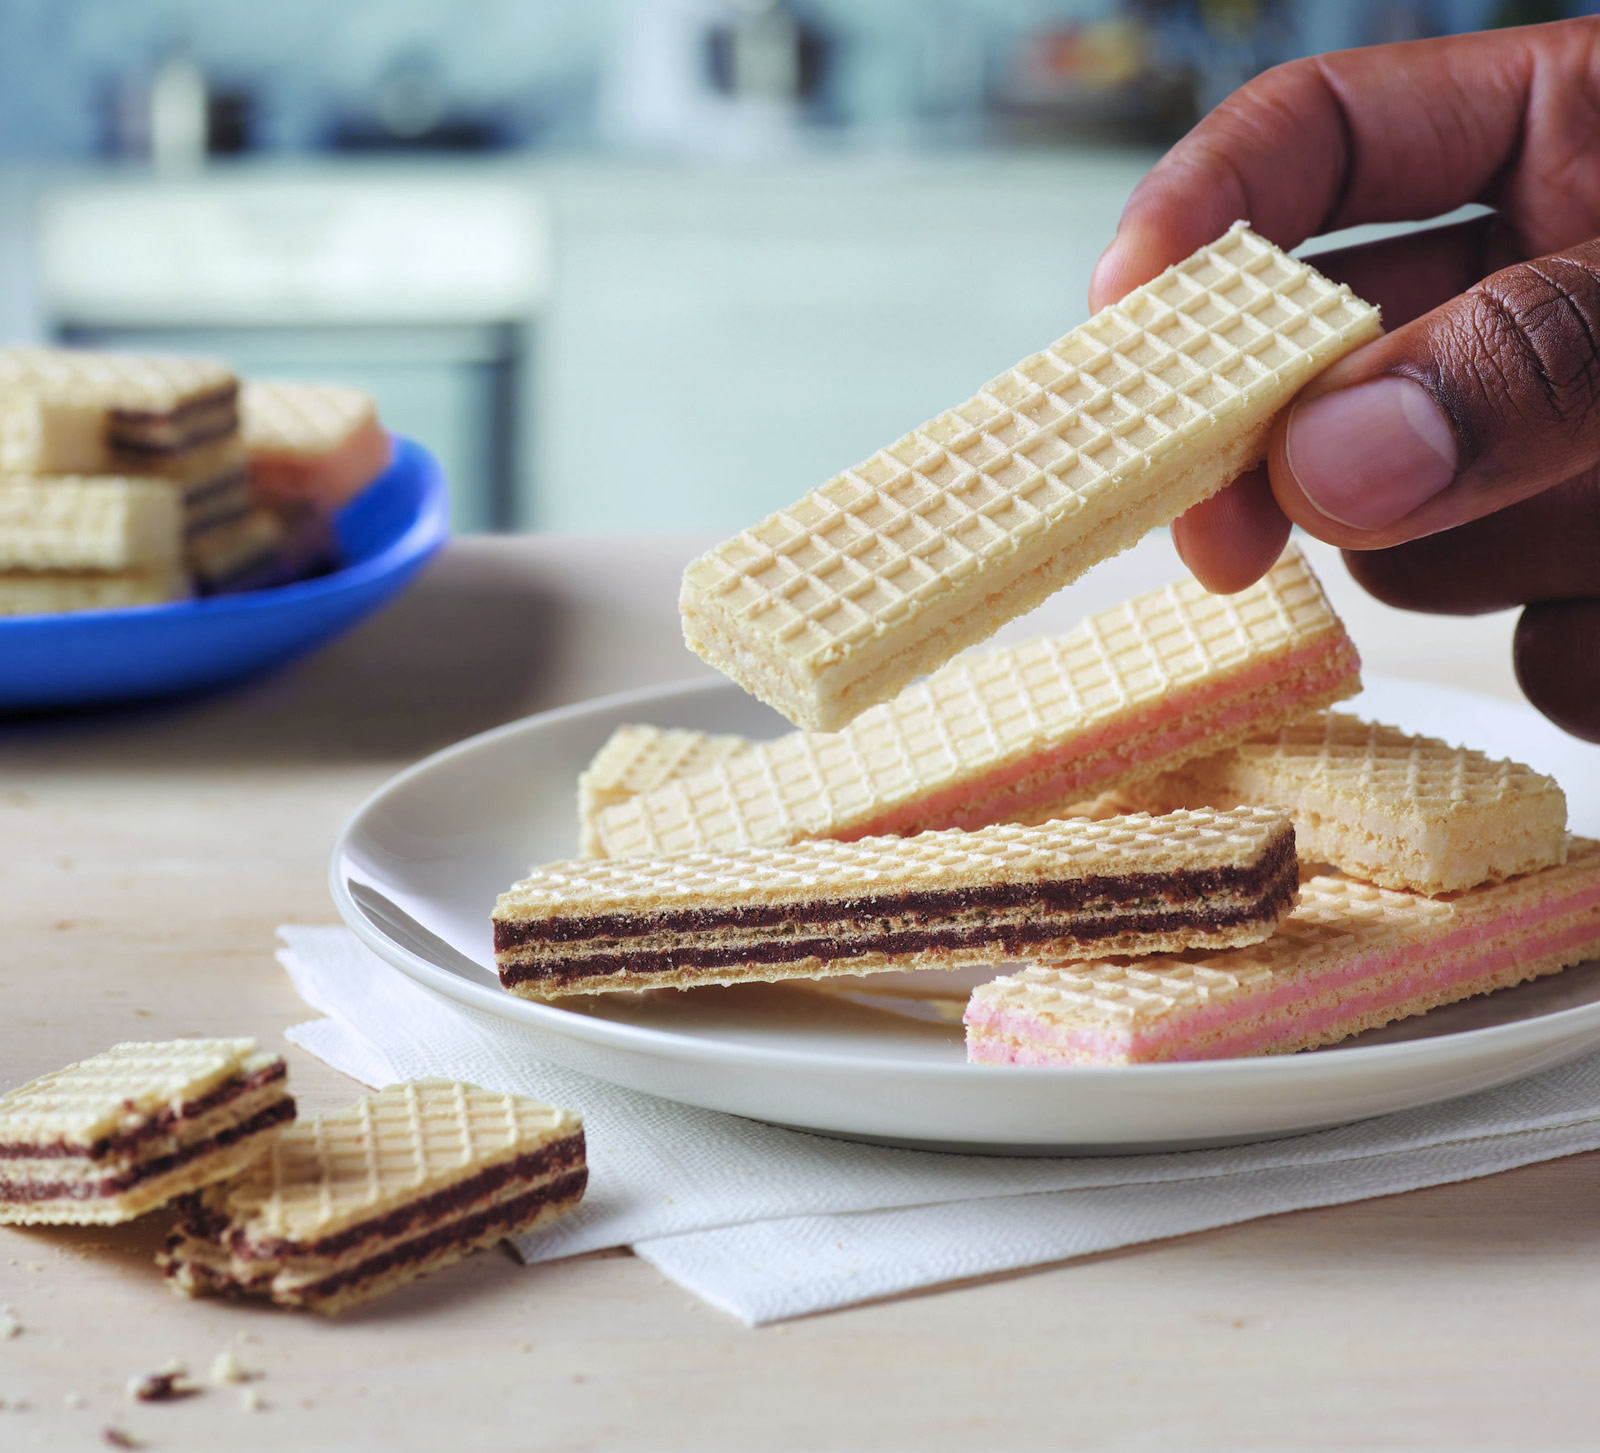 Close-up of someone holding a wafer with other flavours of wafers on a plate